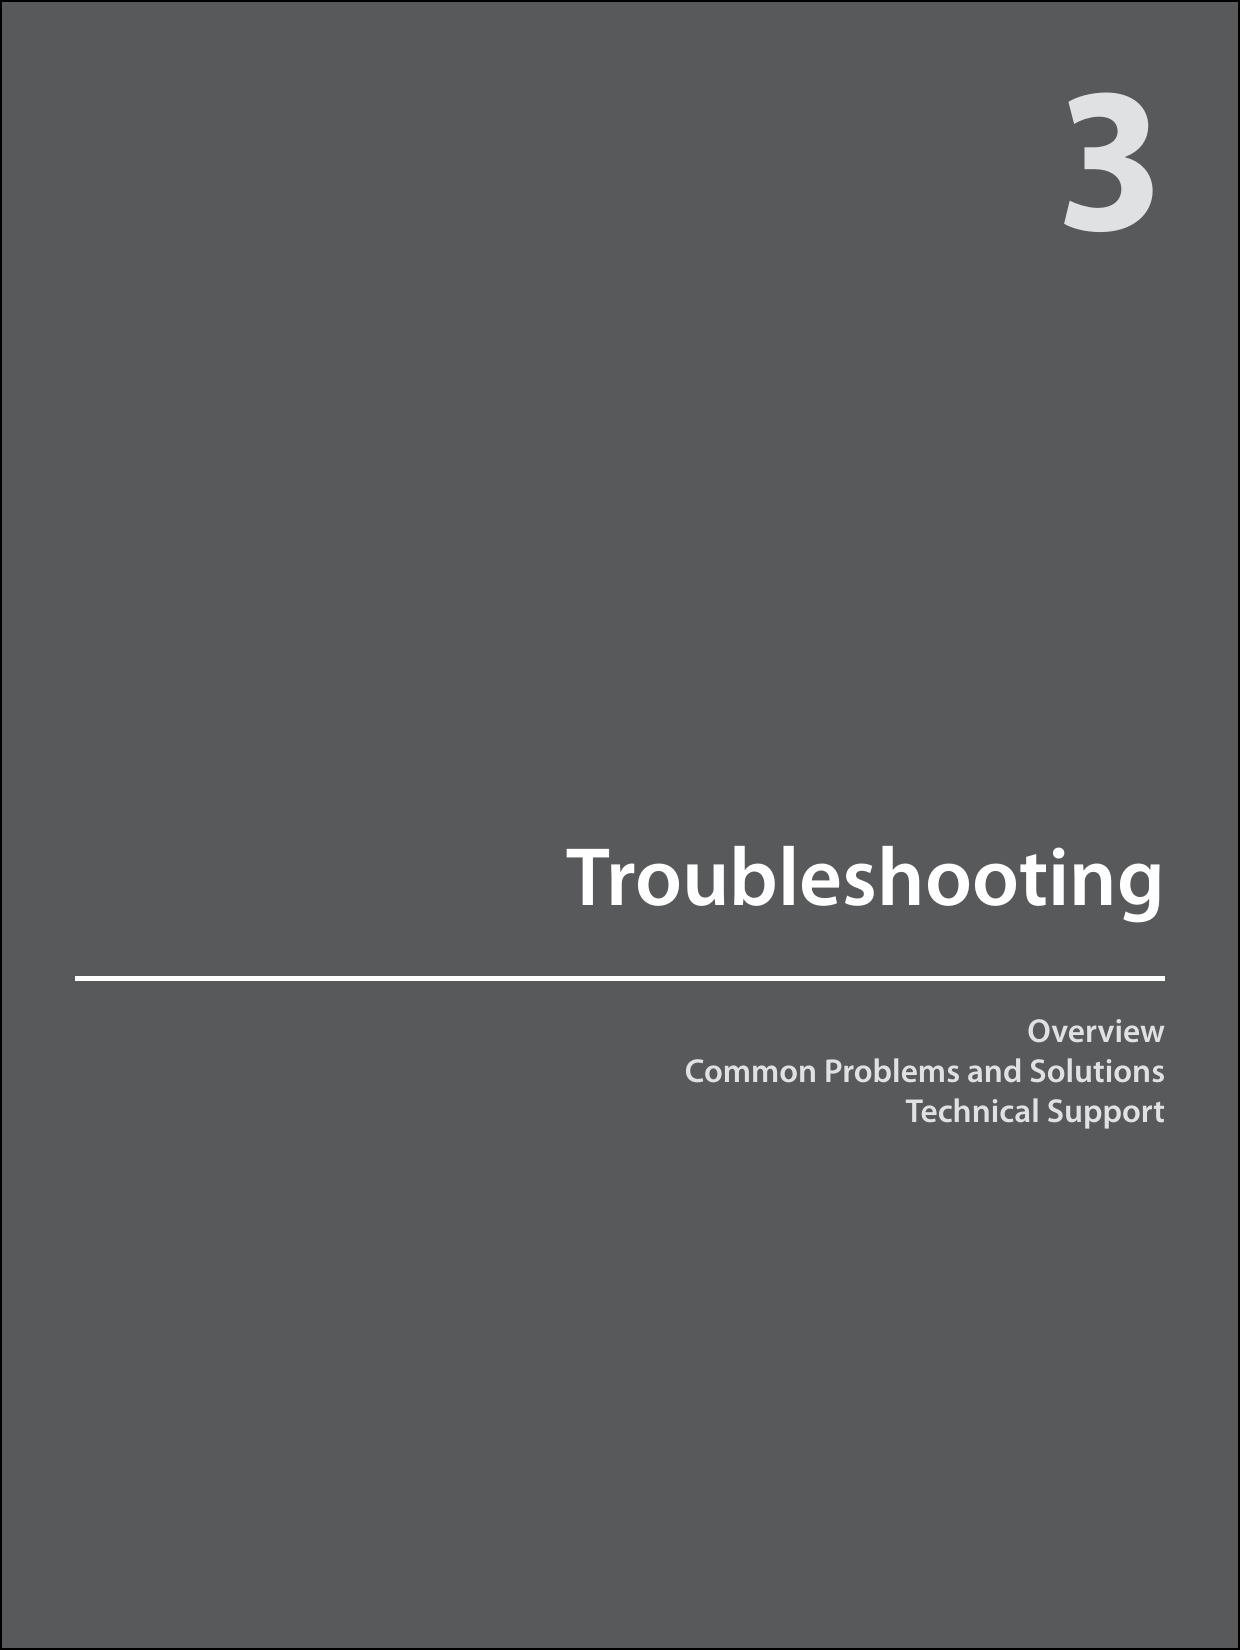 OverviewCommon Problems and SolutionsTechnical SupportTroubleshooting3